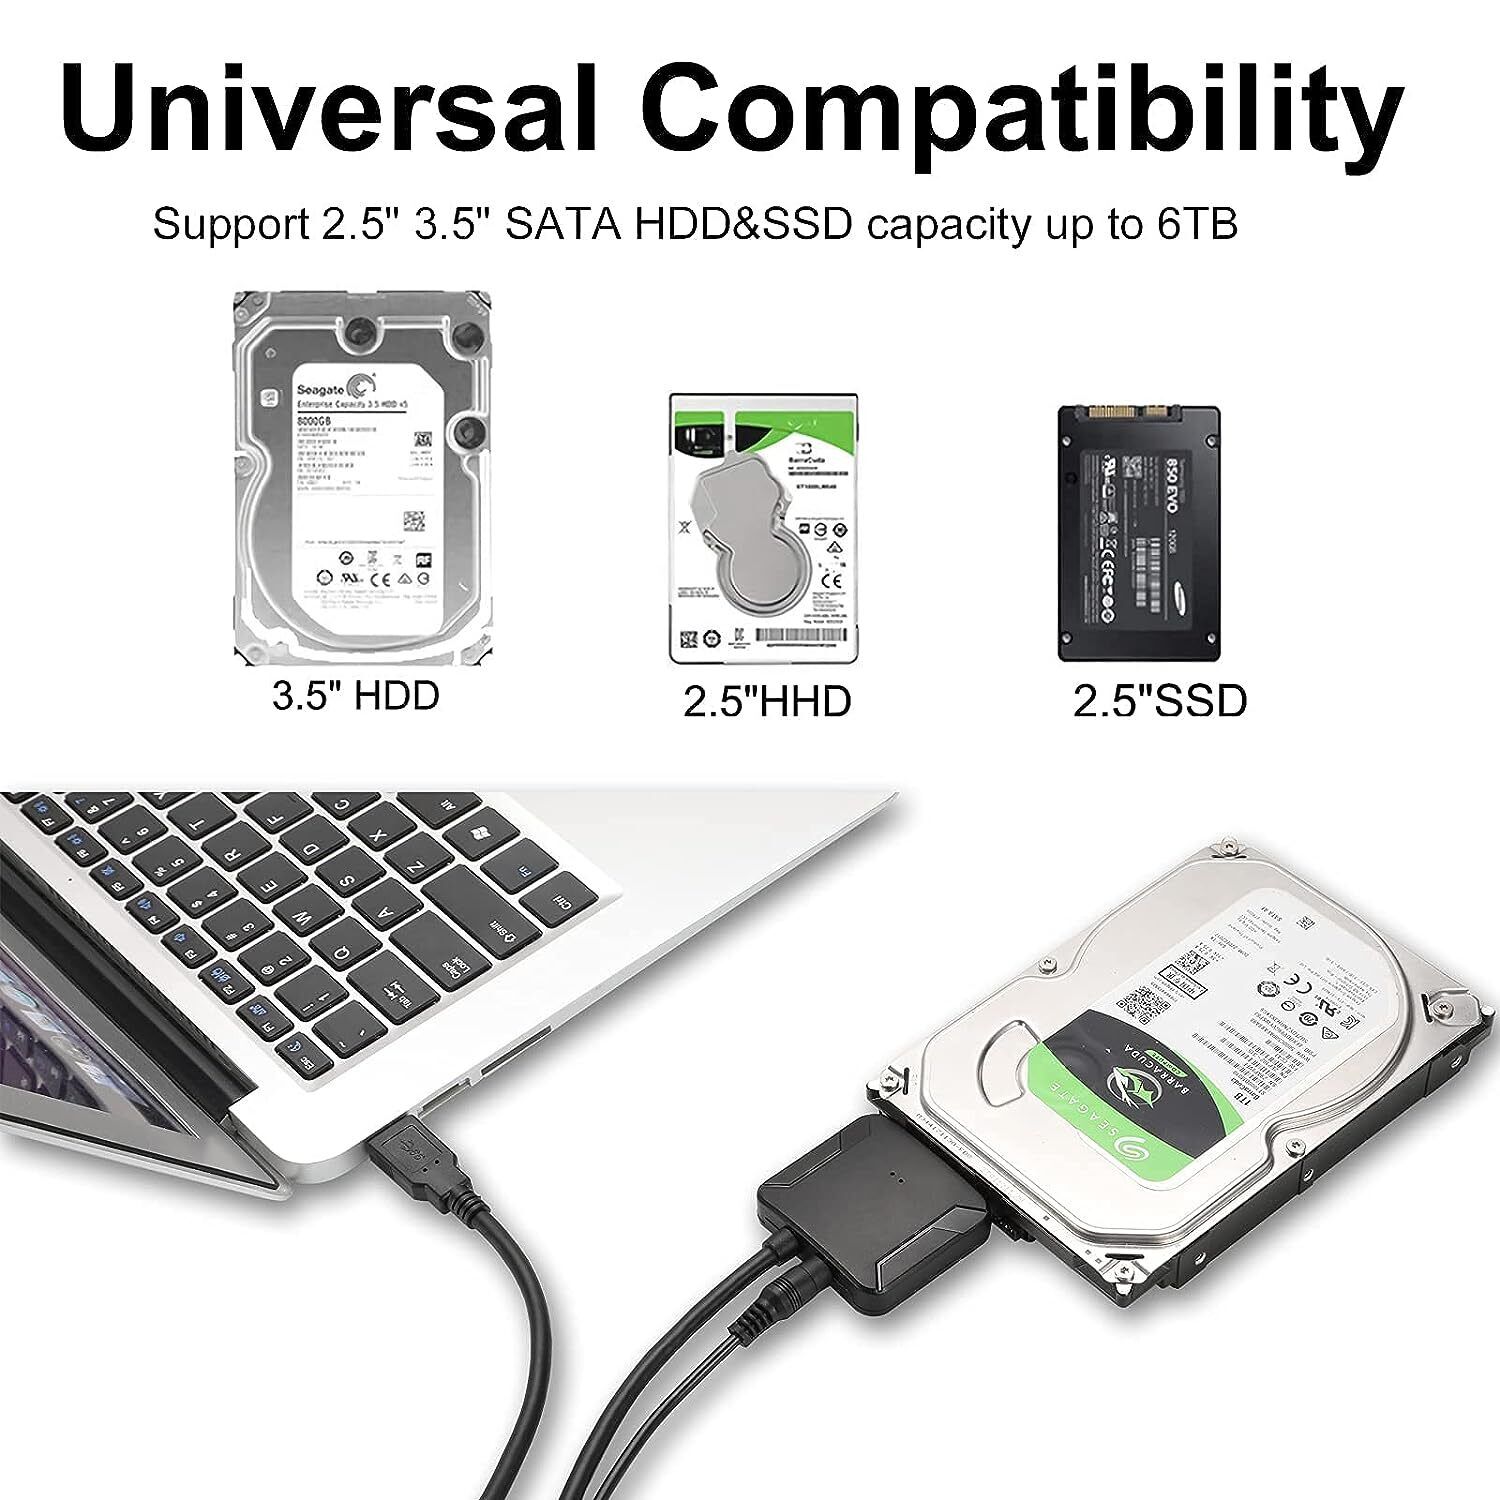 SATA to USB 3.0 Adapter Convertor Cable for 2.5" 3.5" HDD SSD Hard Drive US Ship UVOOI Does Not Apply - фотография #3